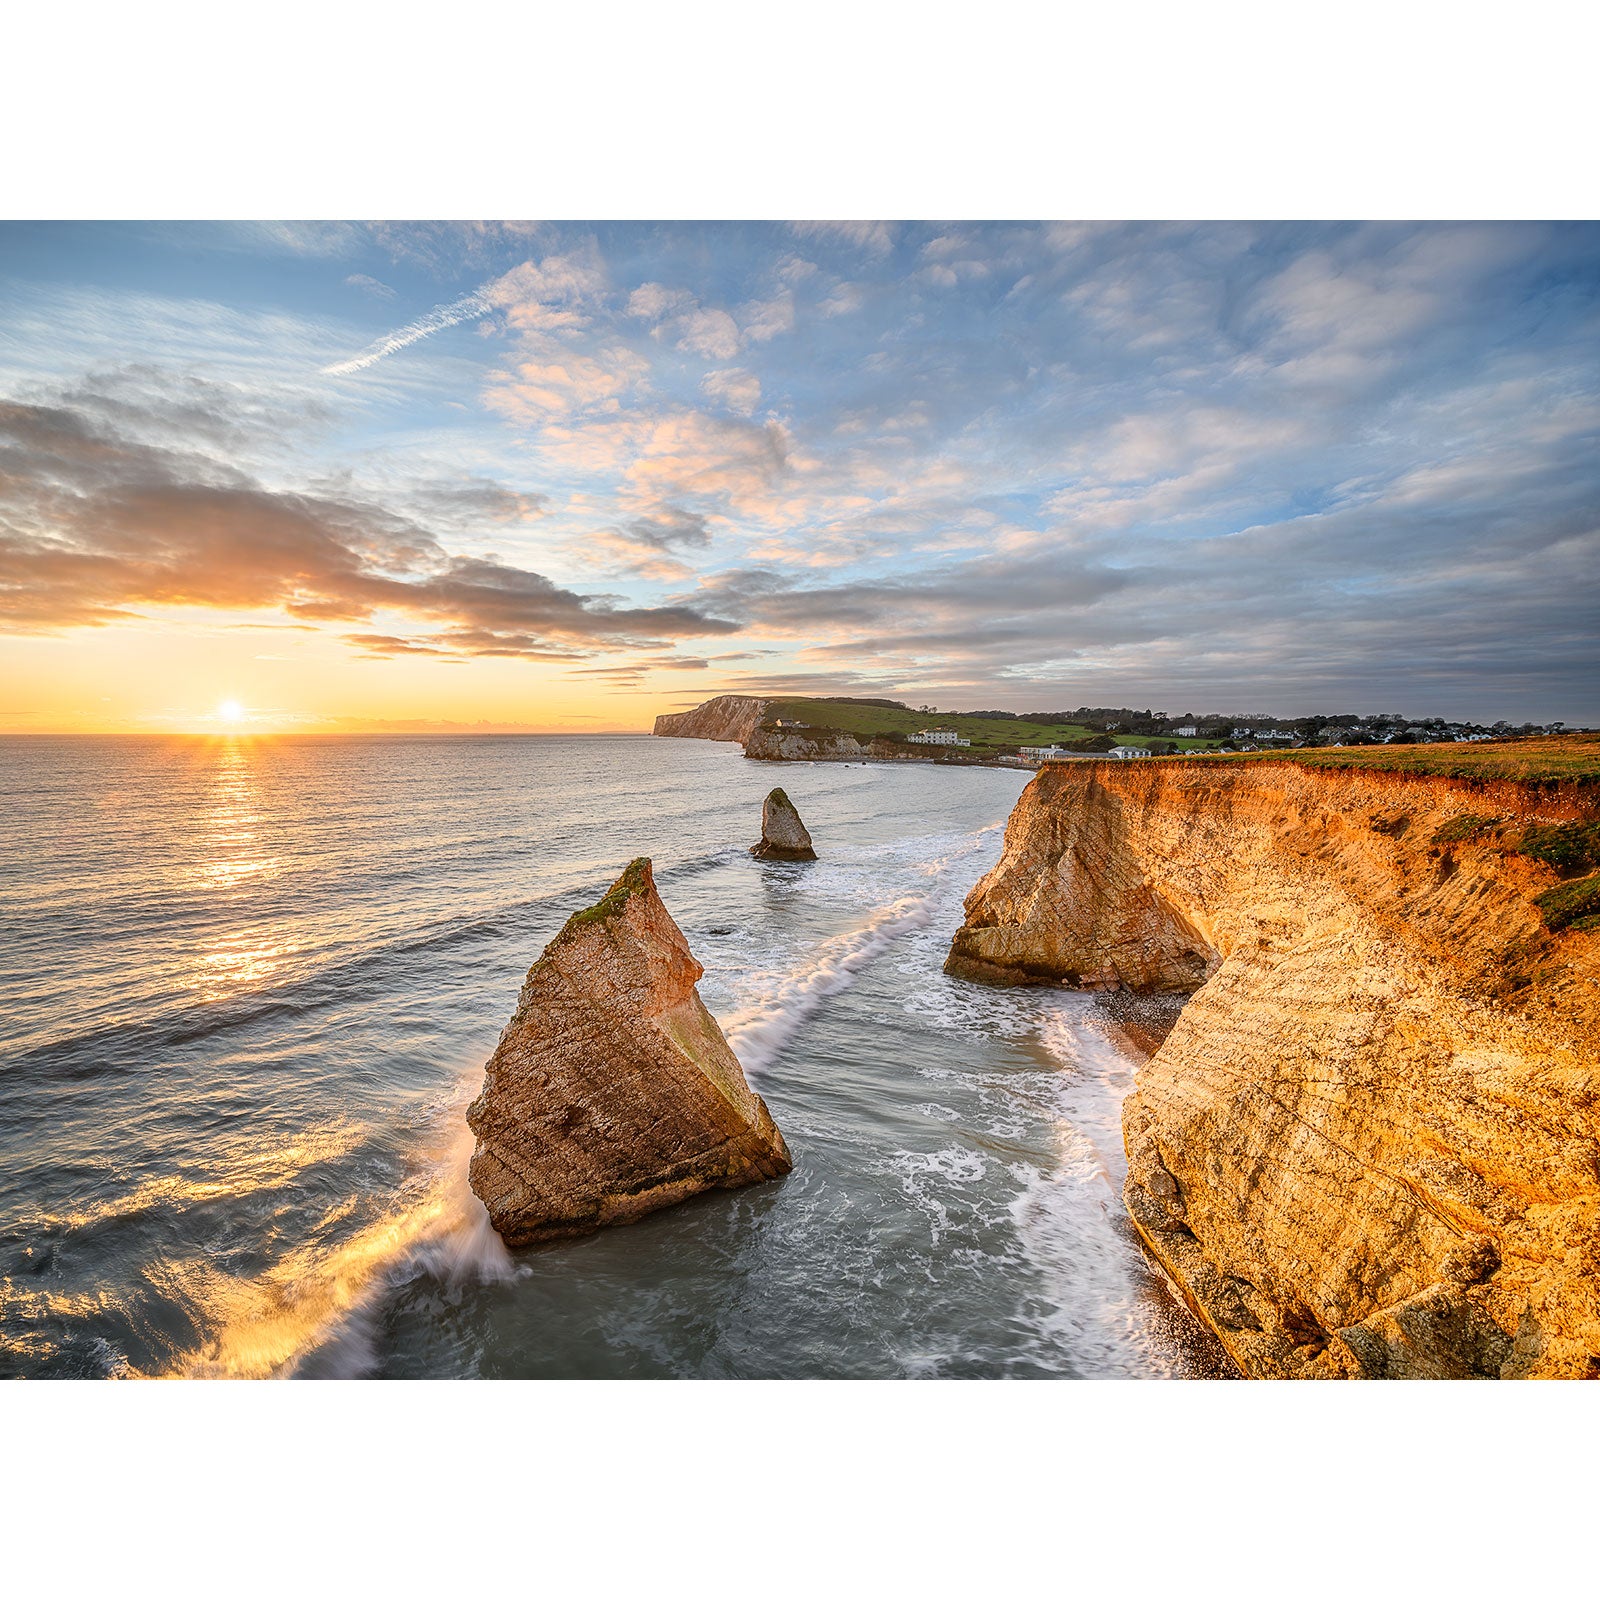 Sunset at Freshwater Bay on the Isle of Wight with sea stacks and crashing waves by Available Light Photography.